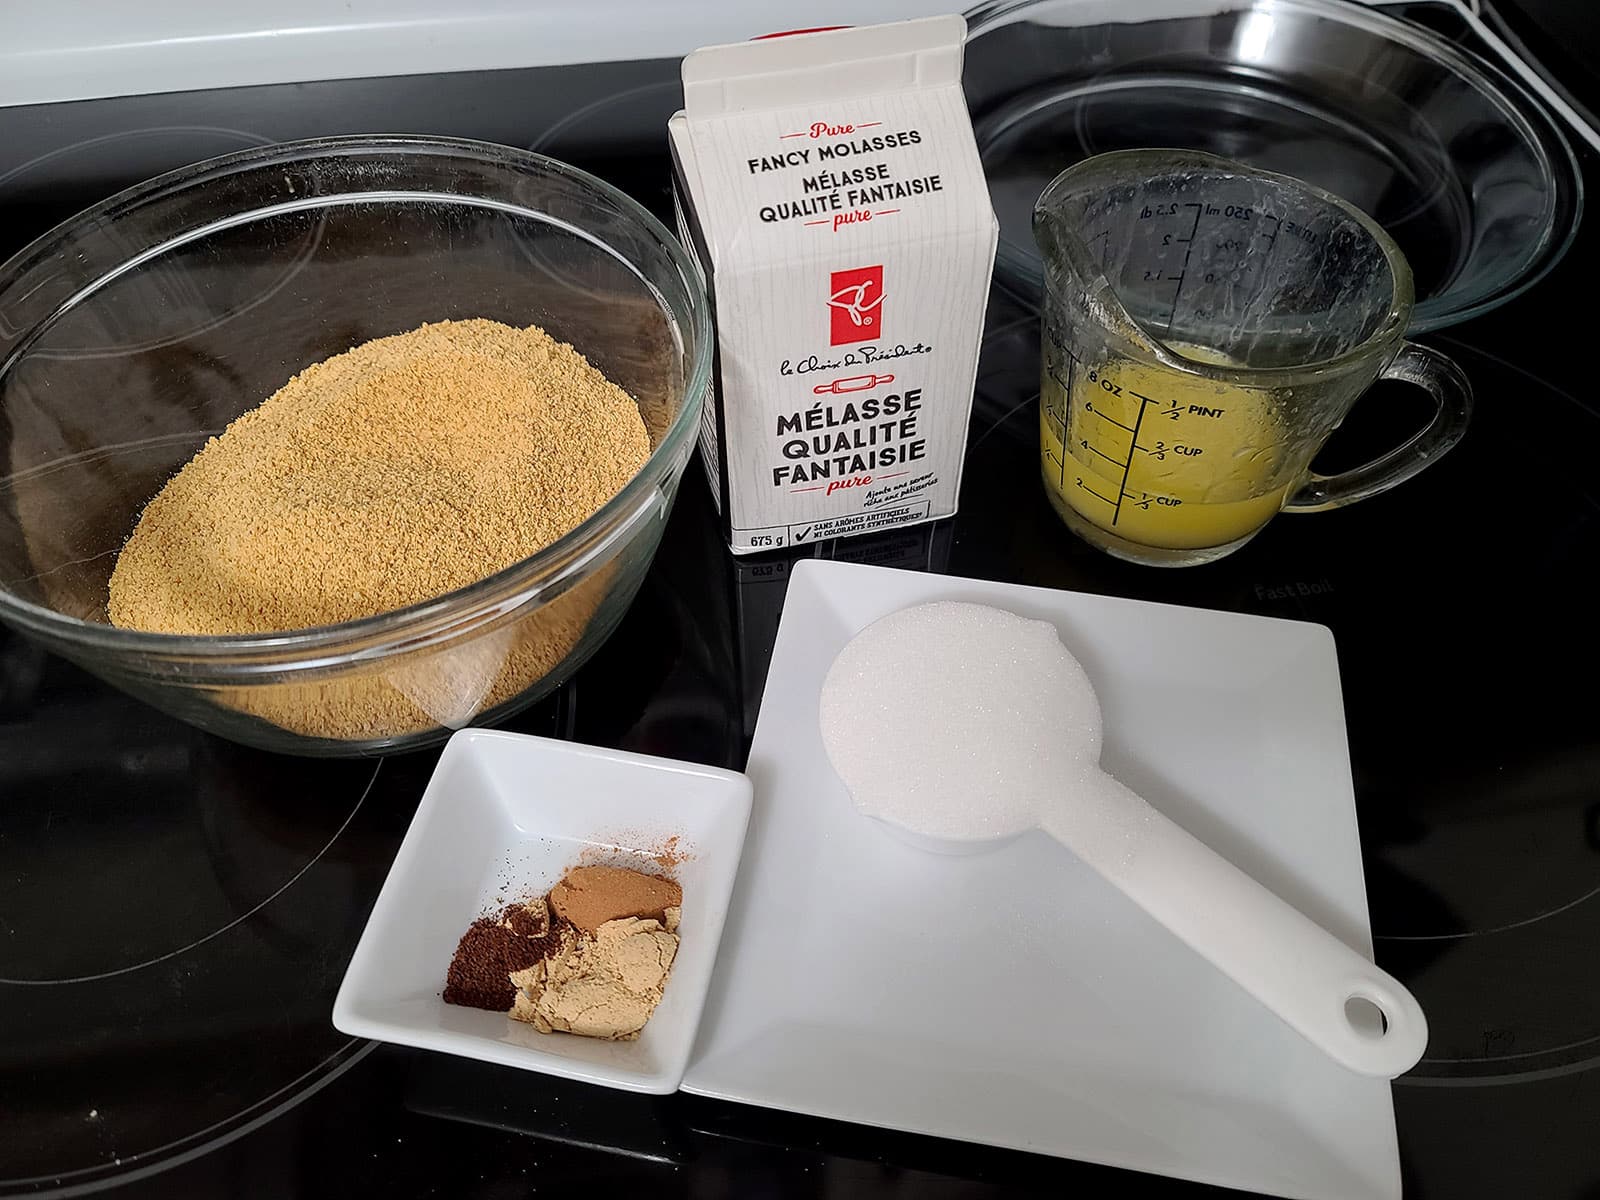 The crust ingredients laid out on a stove top.